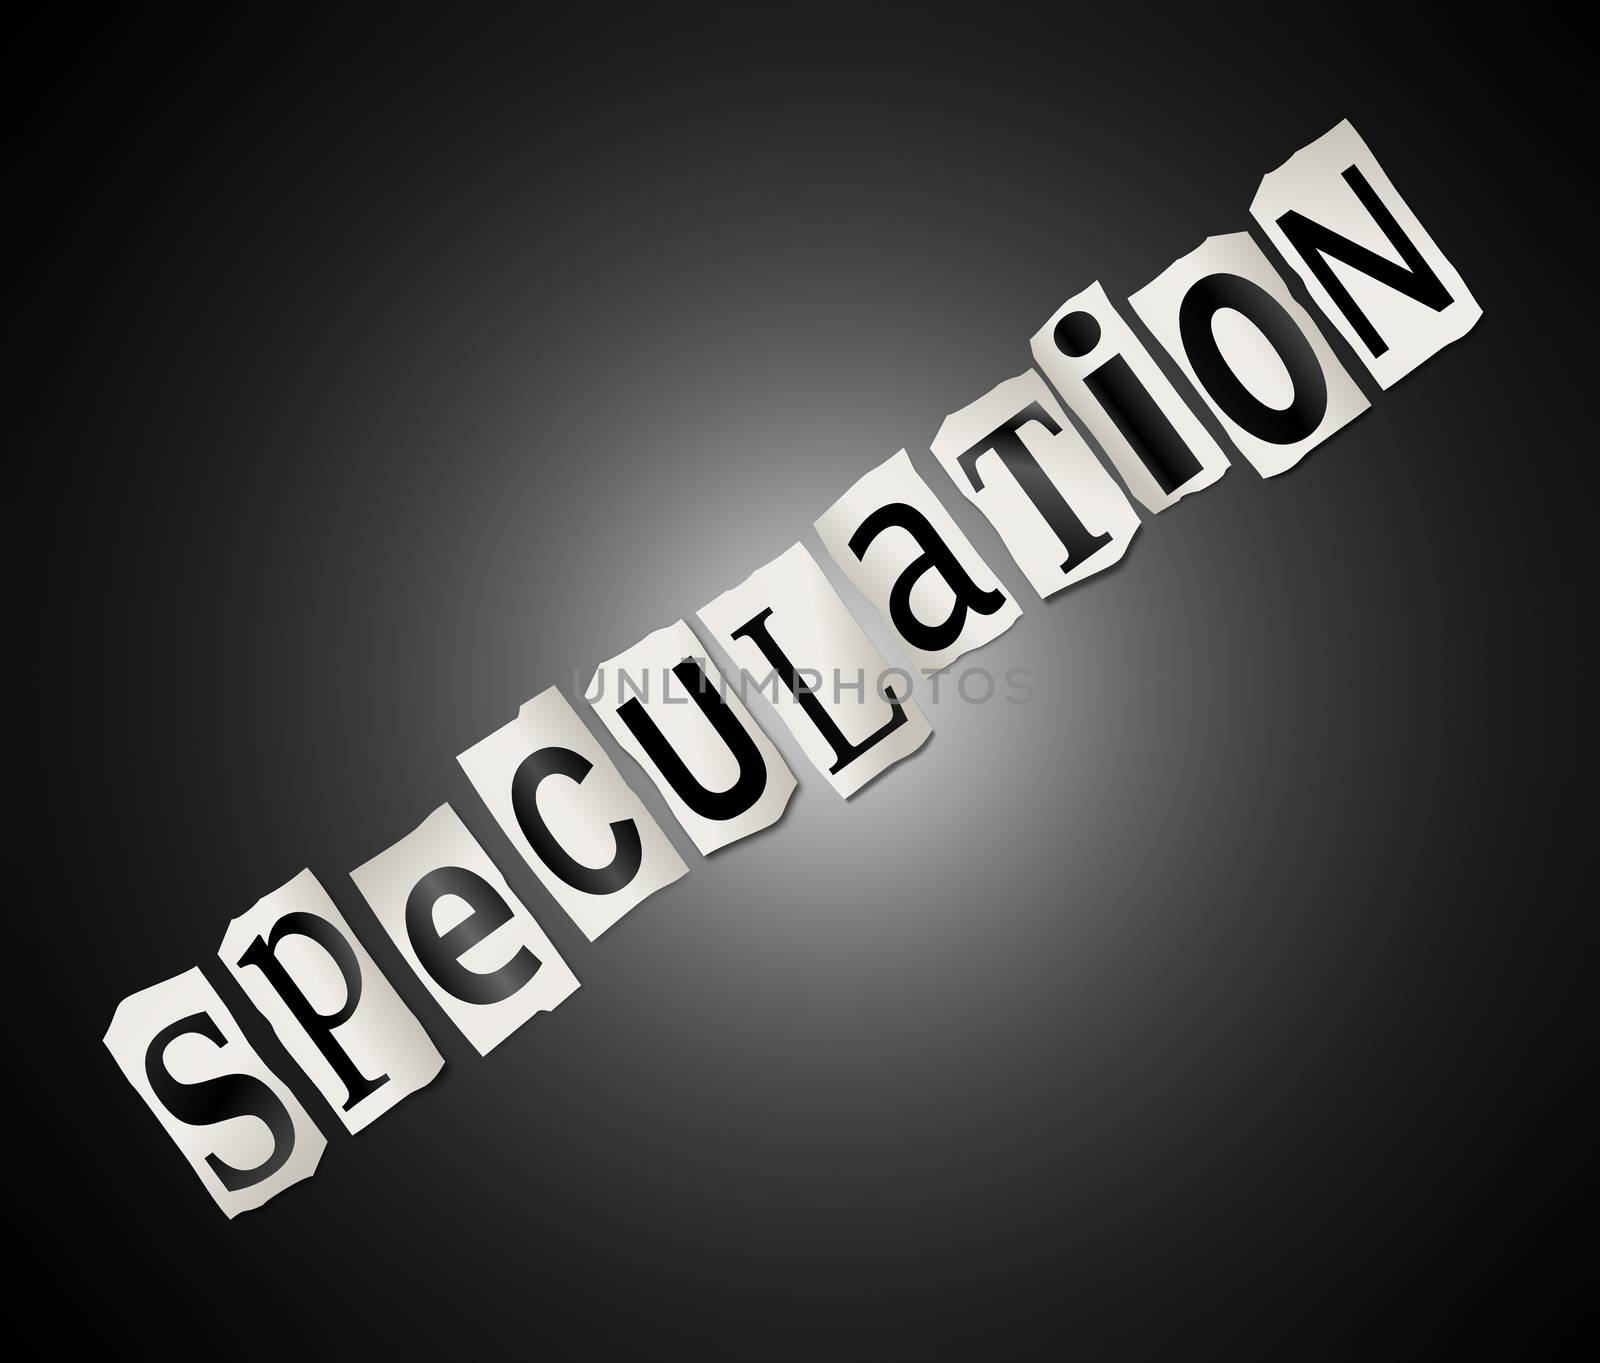 Illustration depicting a set of cut out printed letters arranged to form the word speculation.